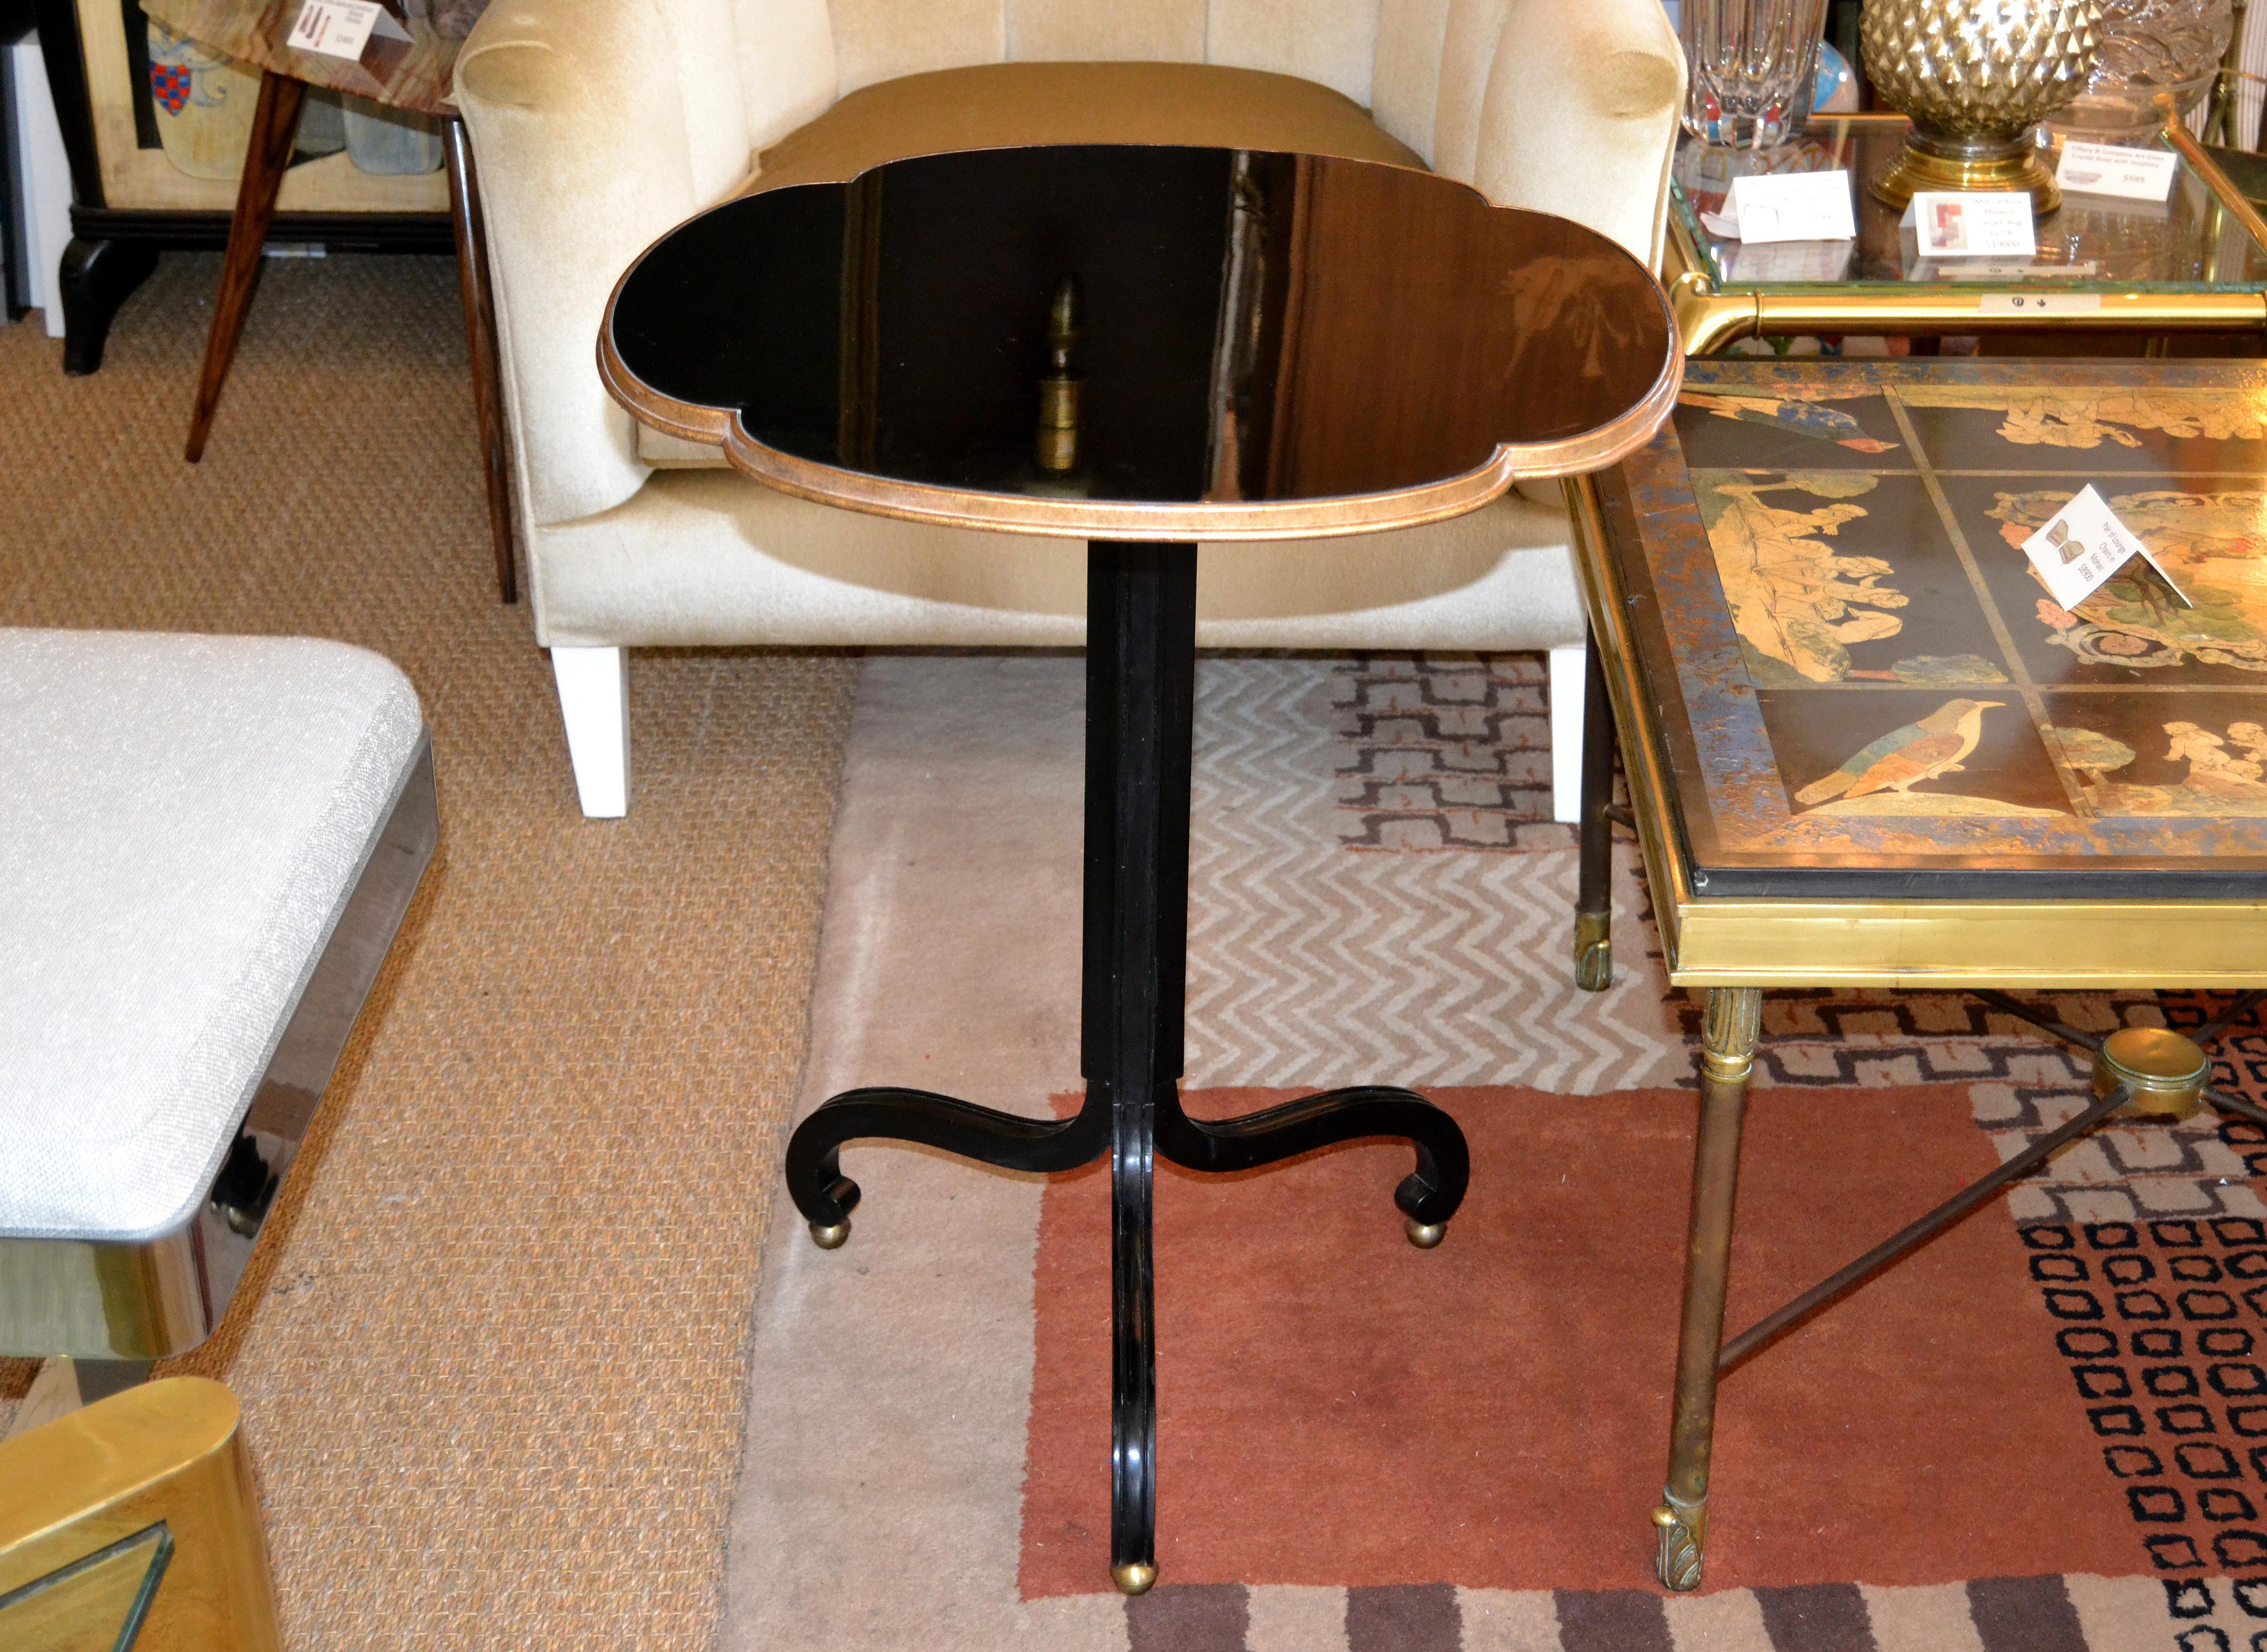 Art Deco round three legged mahogany side table with a black laminate top by baker.
The sculptural legs have nice round brass ball feet to it.
The baker metal tag is attached under the top as well as numbered.
Can be used as a side or as a